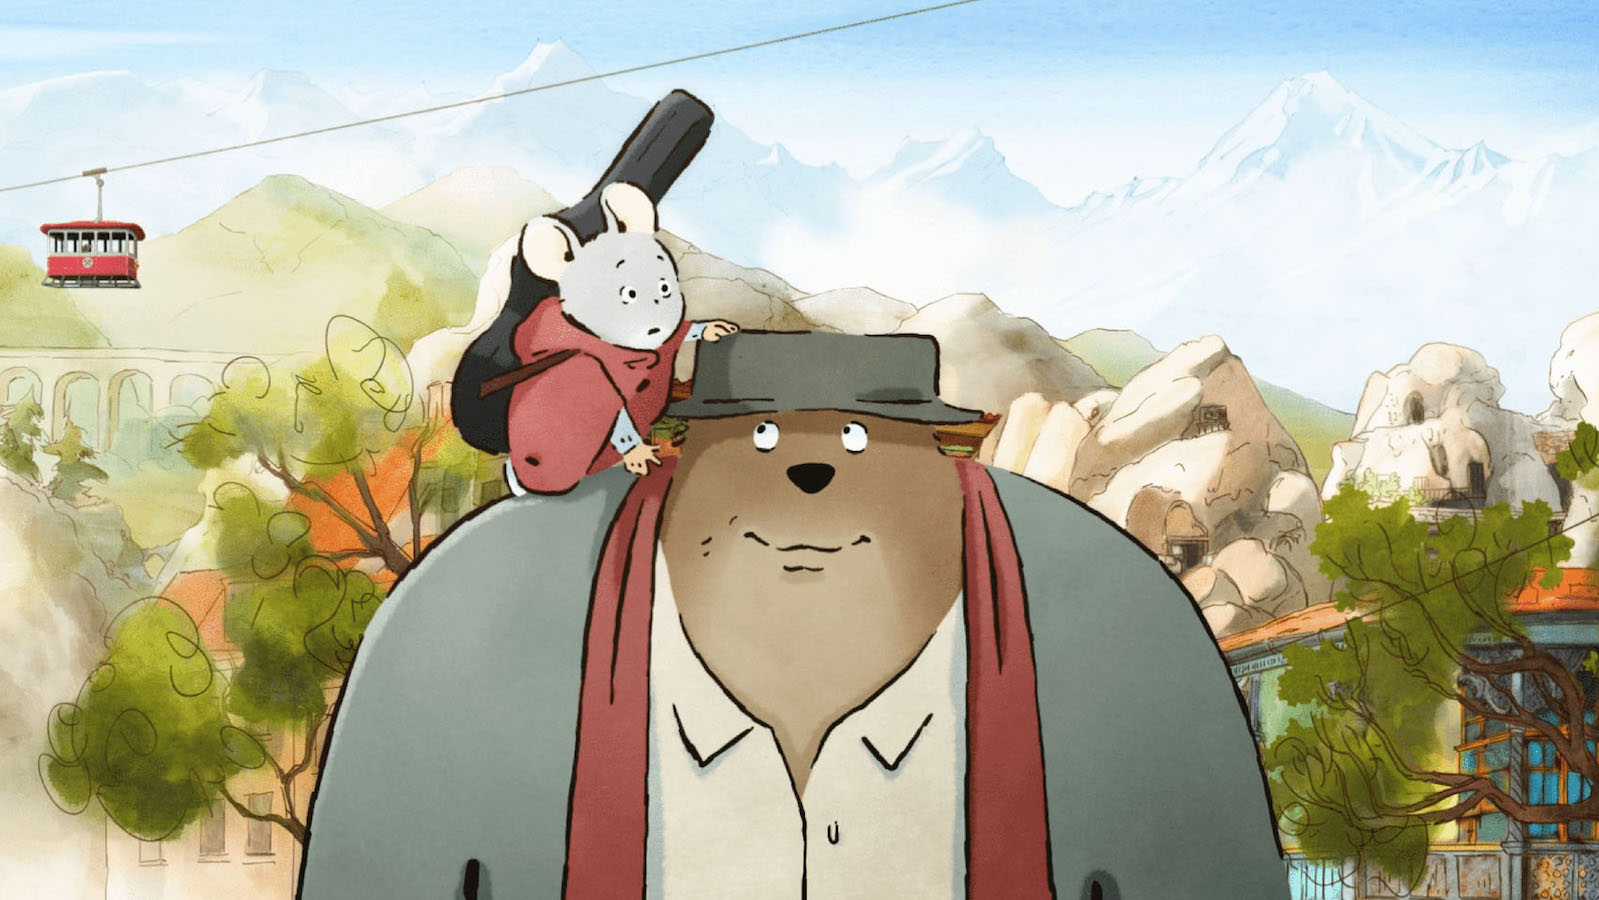 A bear wearing a hat carries a mouse holding a guitar on his shoulder